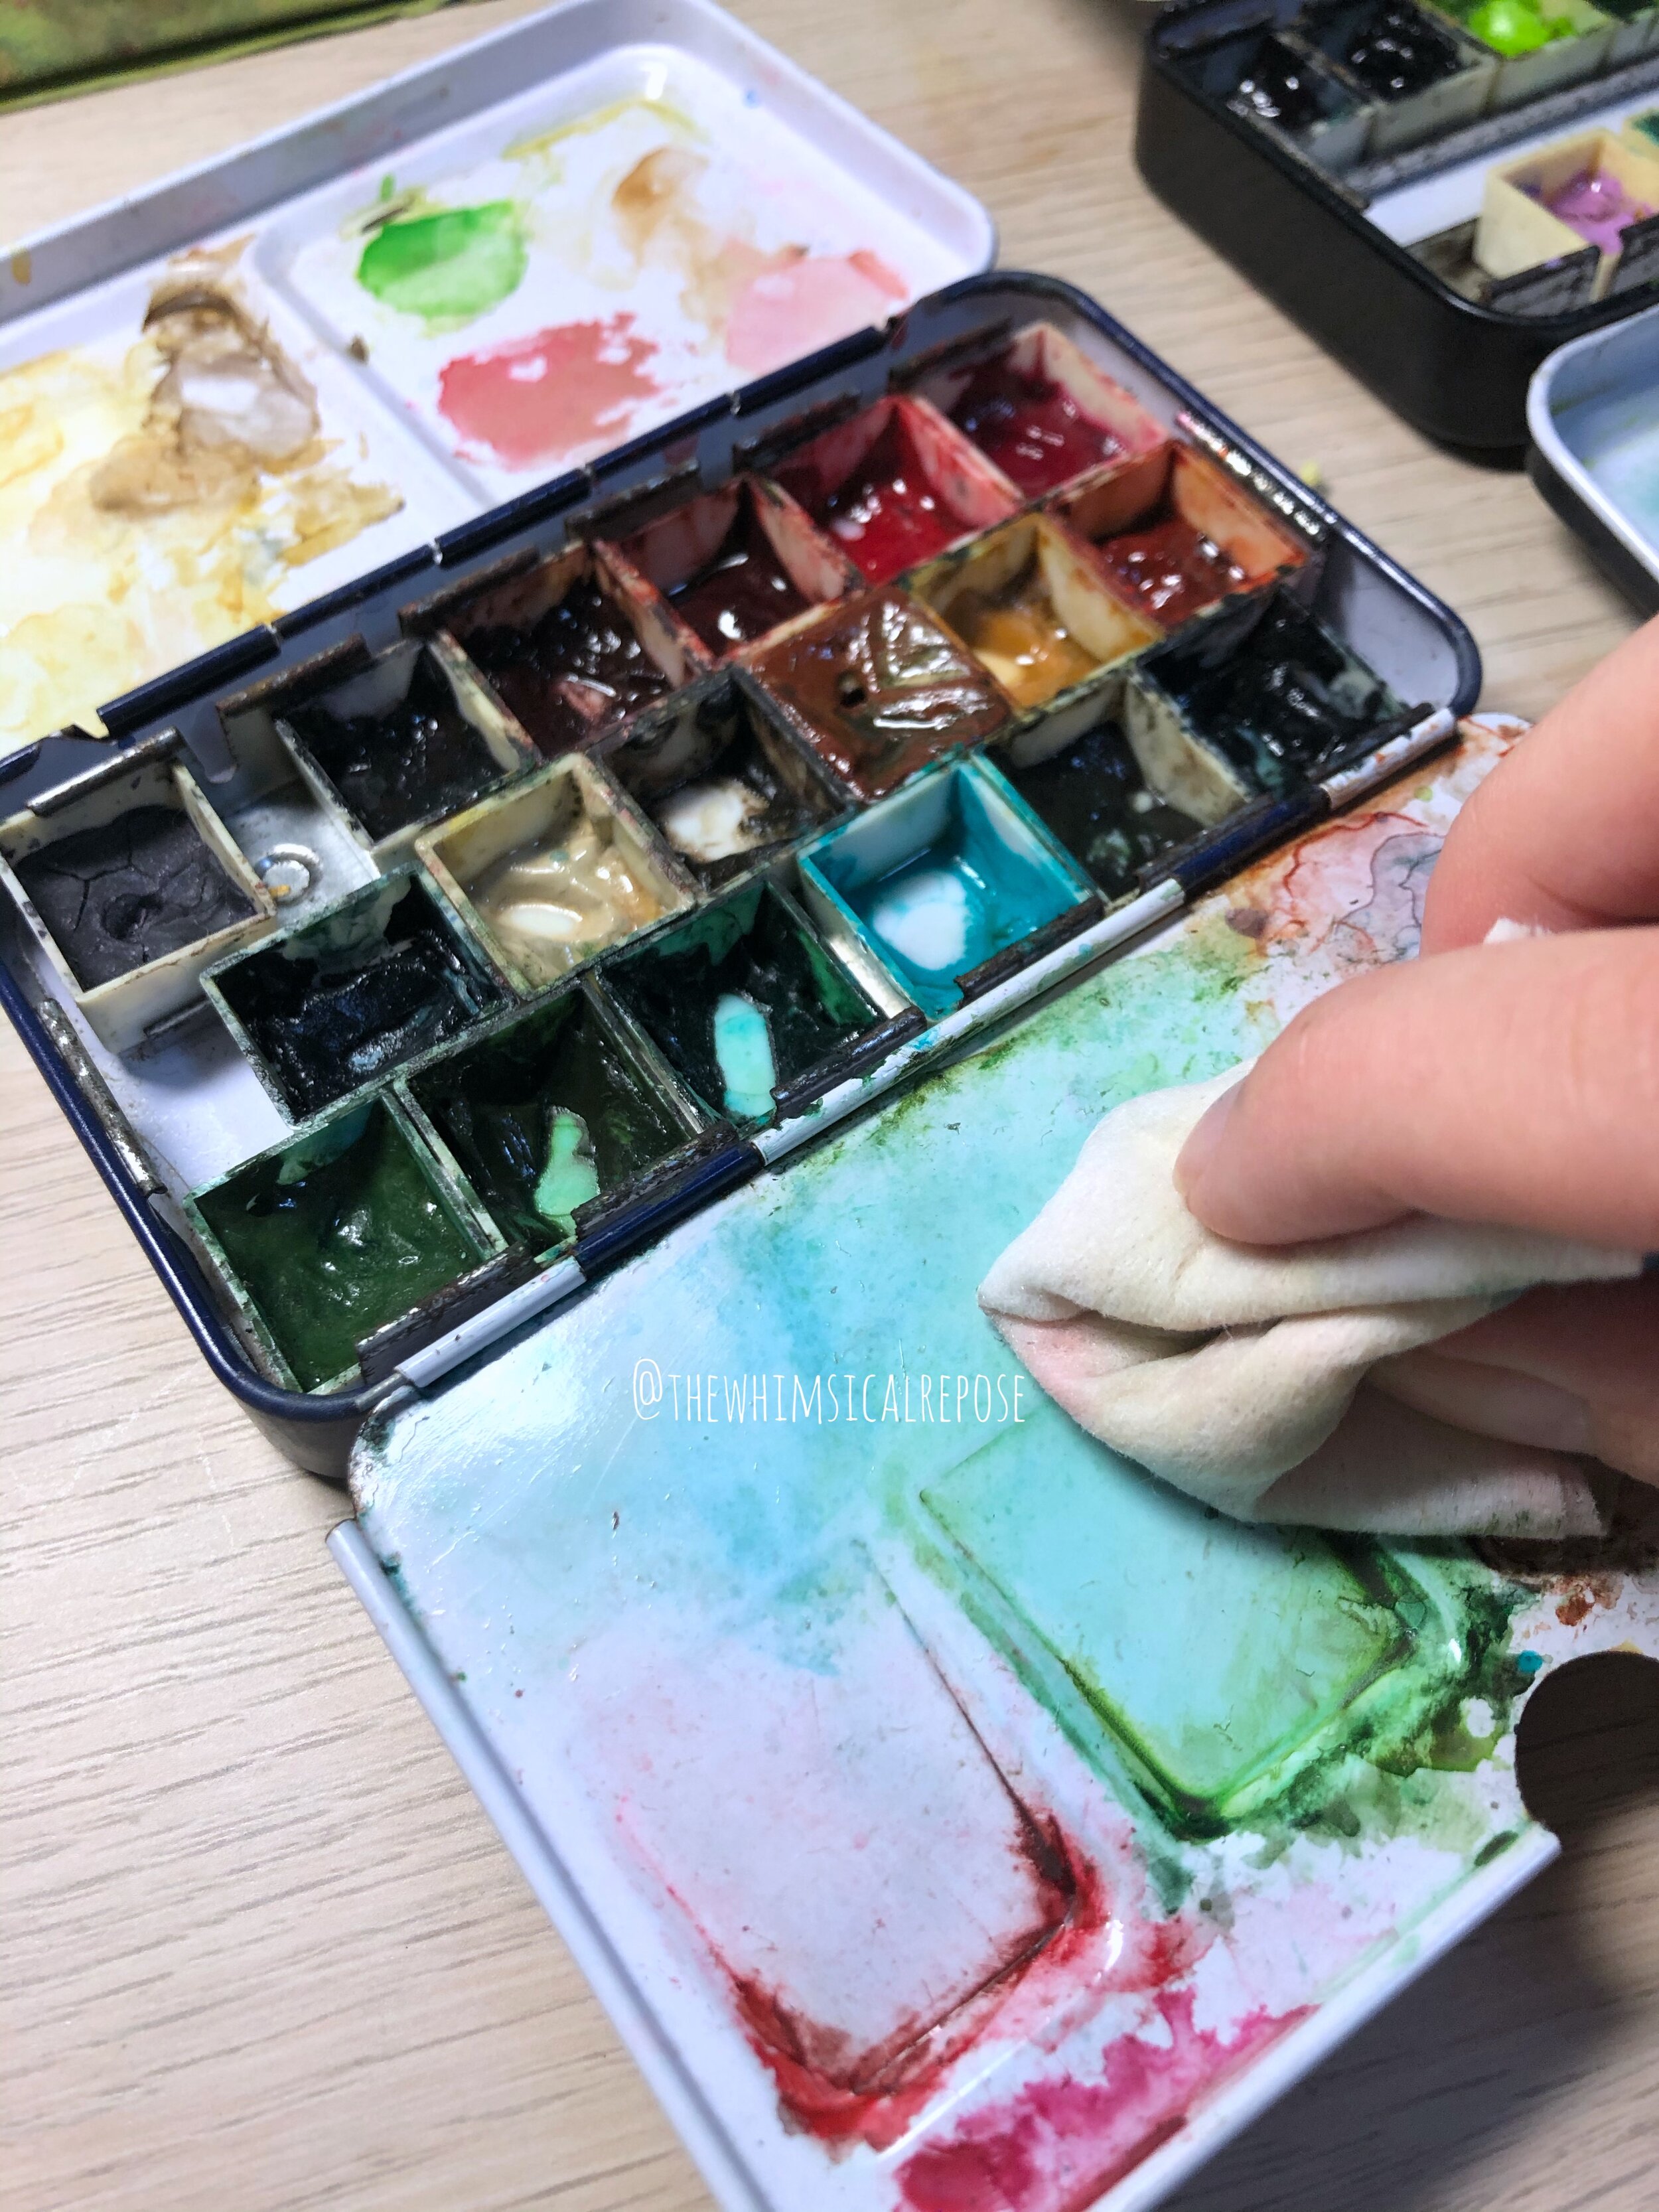 Cleaning Watercolor Brushes - My Process 